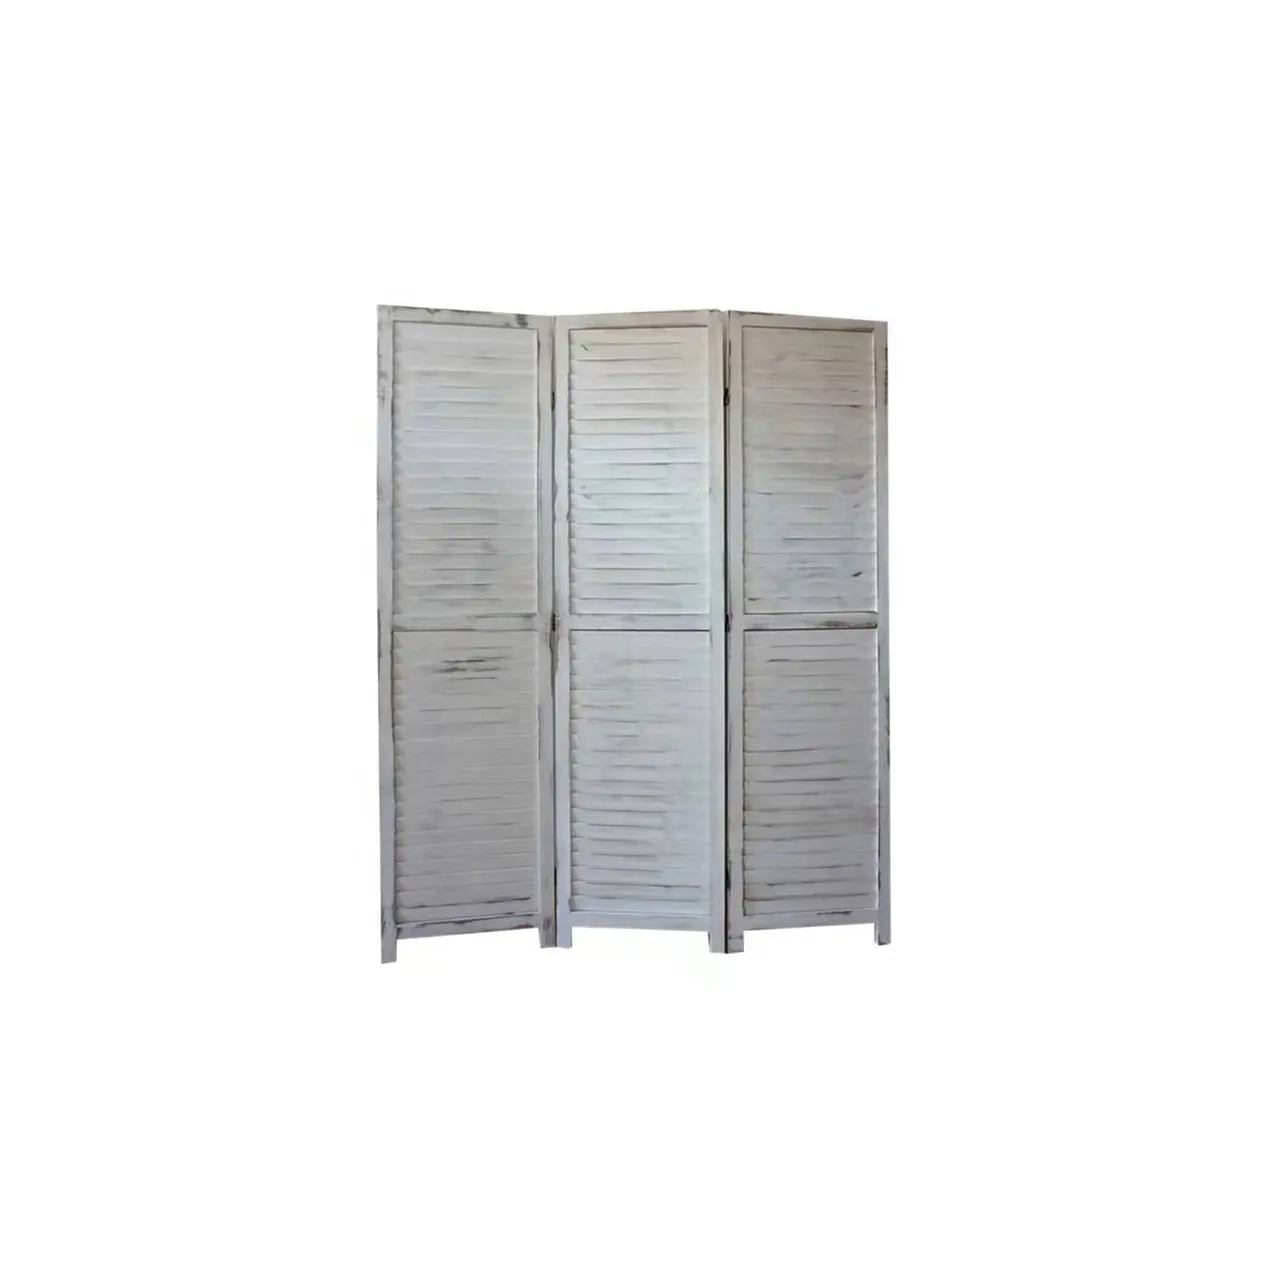 2022 New design high quality factory price room divider partition screen